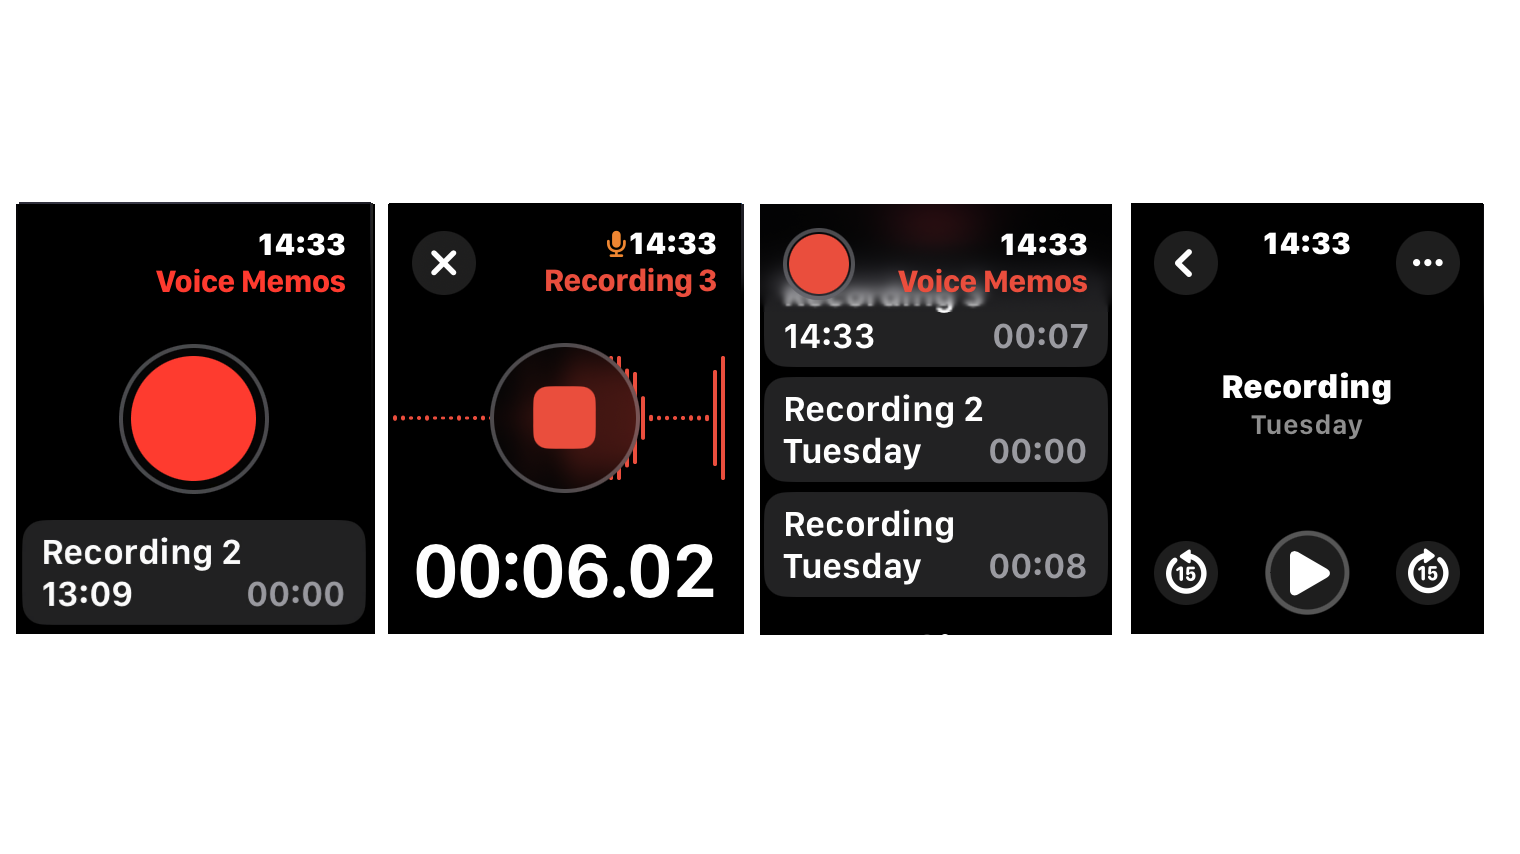 Screenshots of the voice memos feature on the Apple Watch.